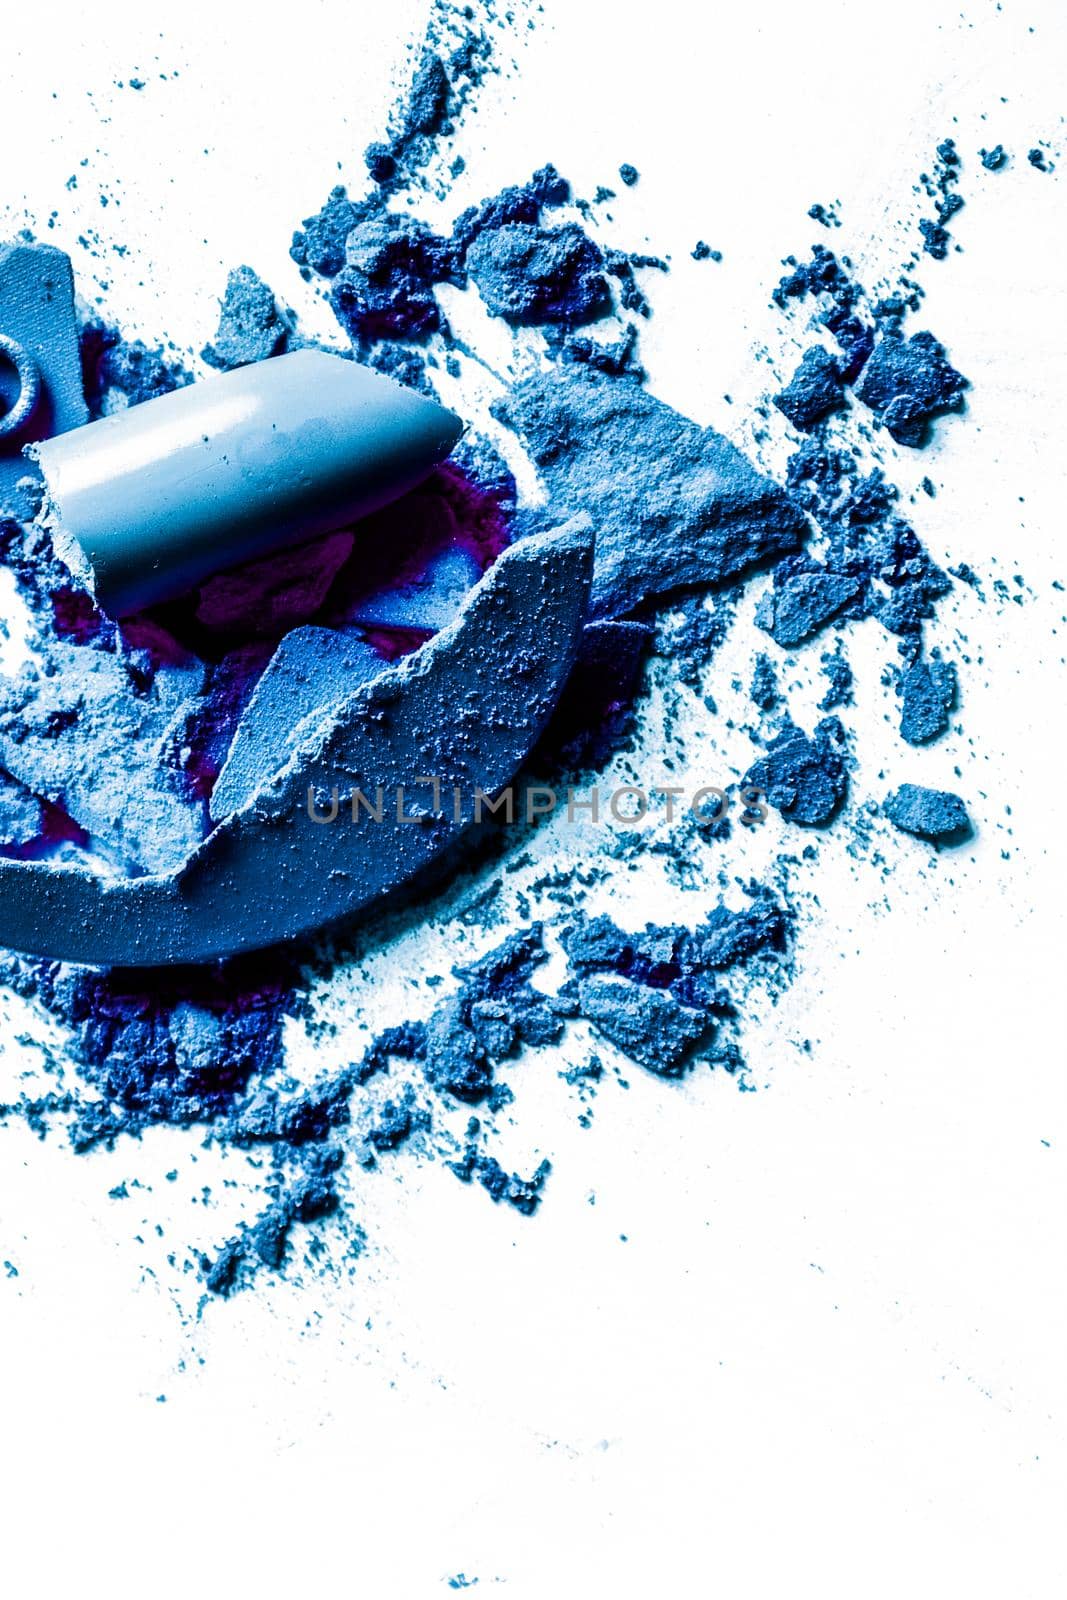 Crushed eyeshadows, lipstick and powder isolated on white background by Anneleven